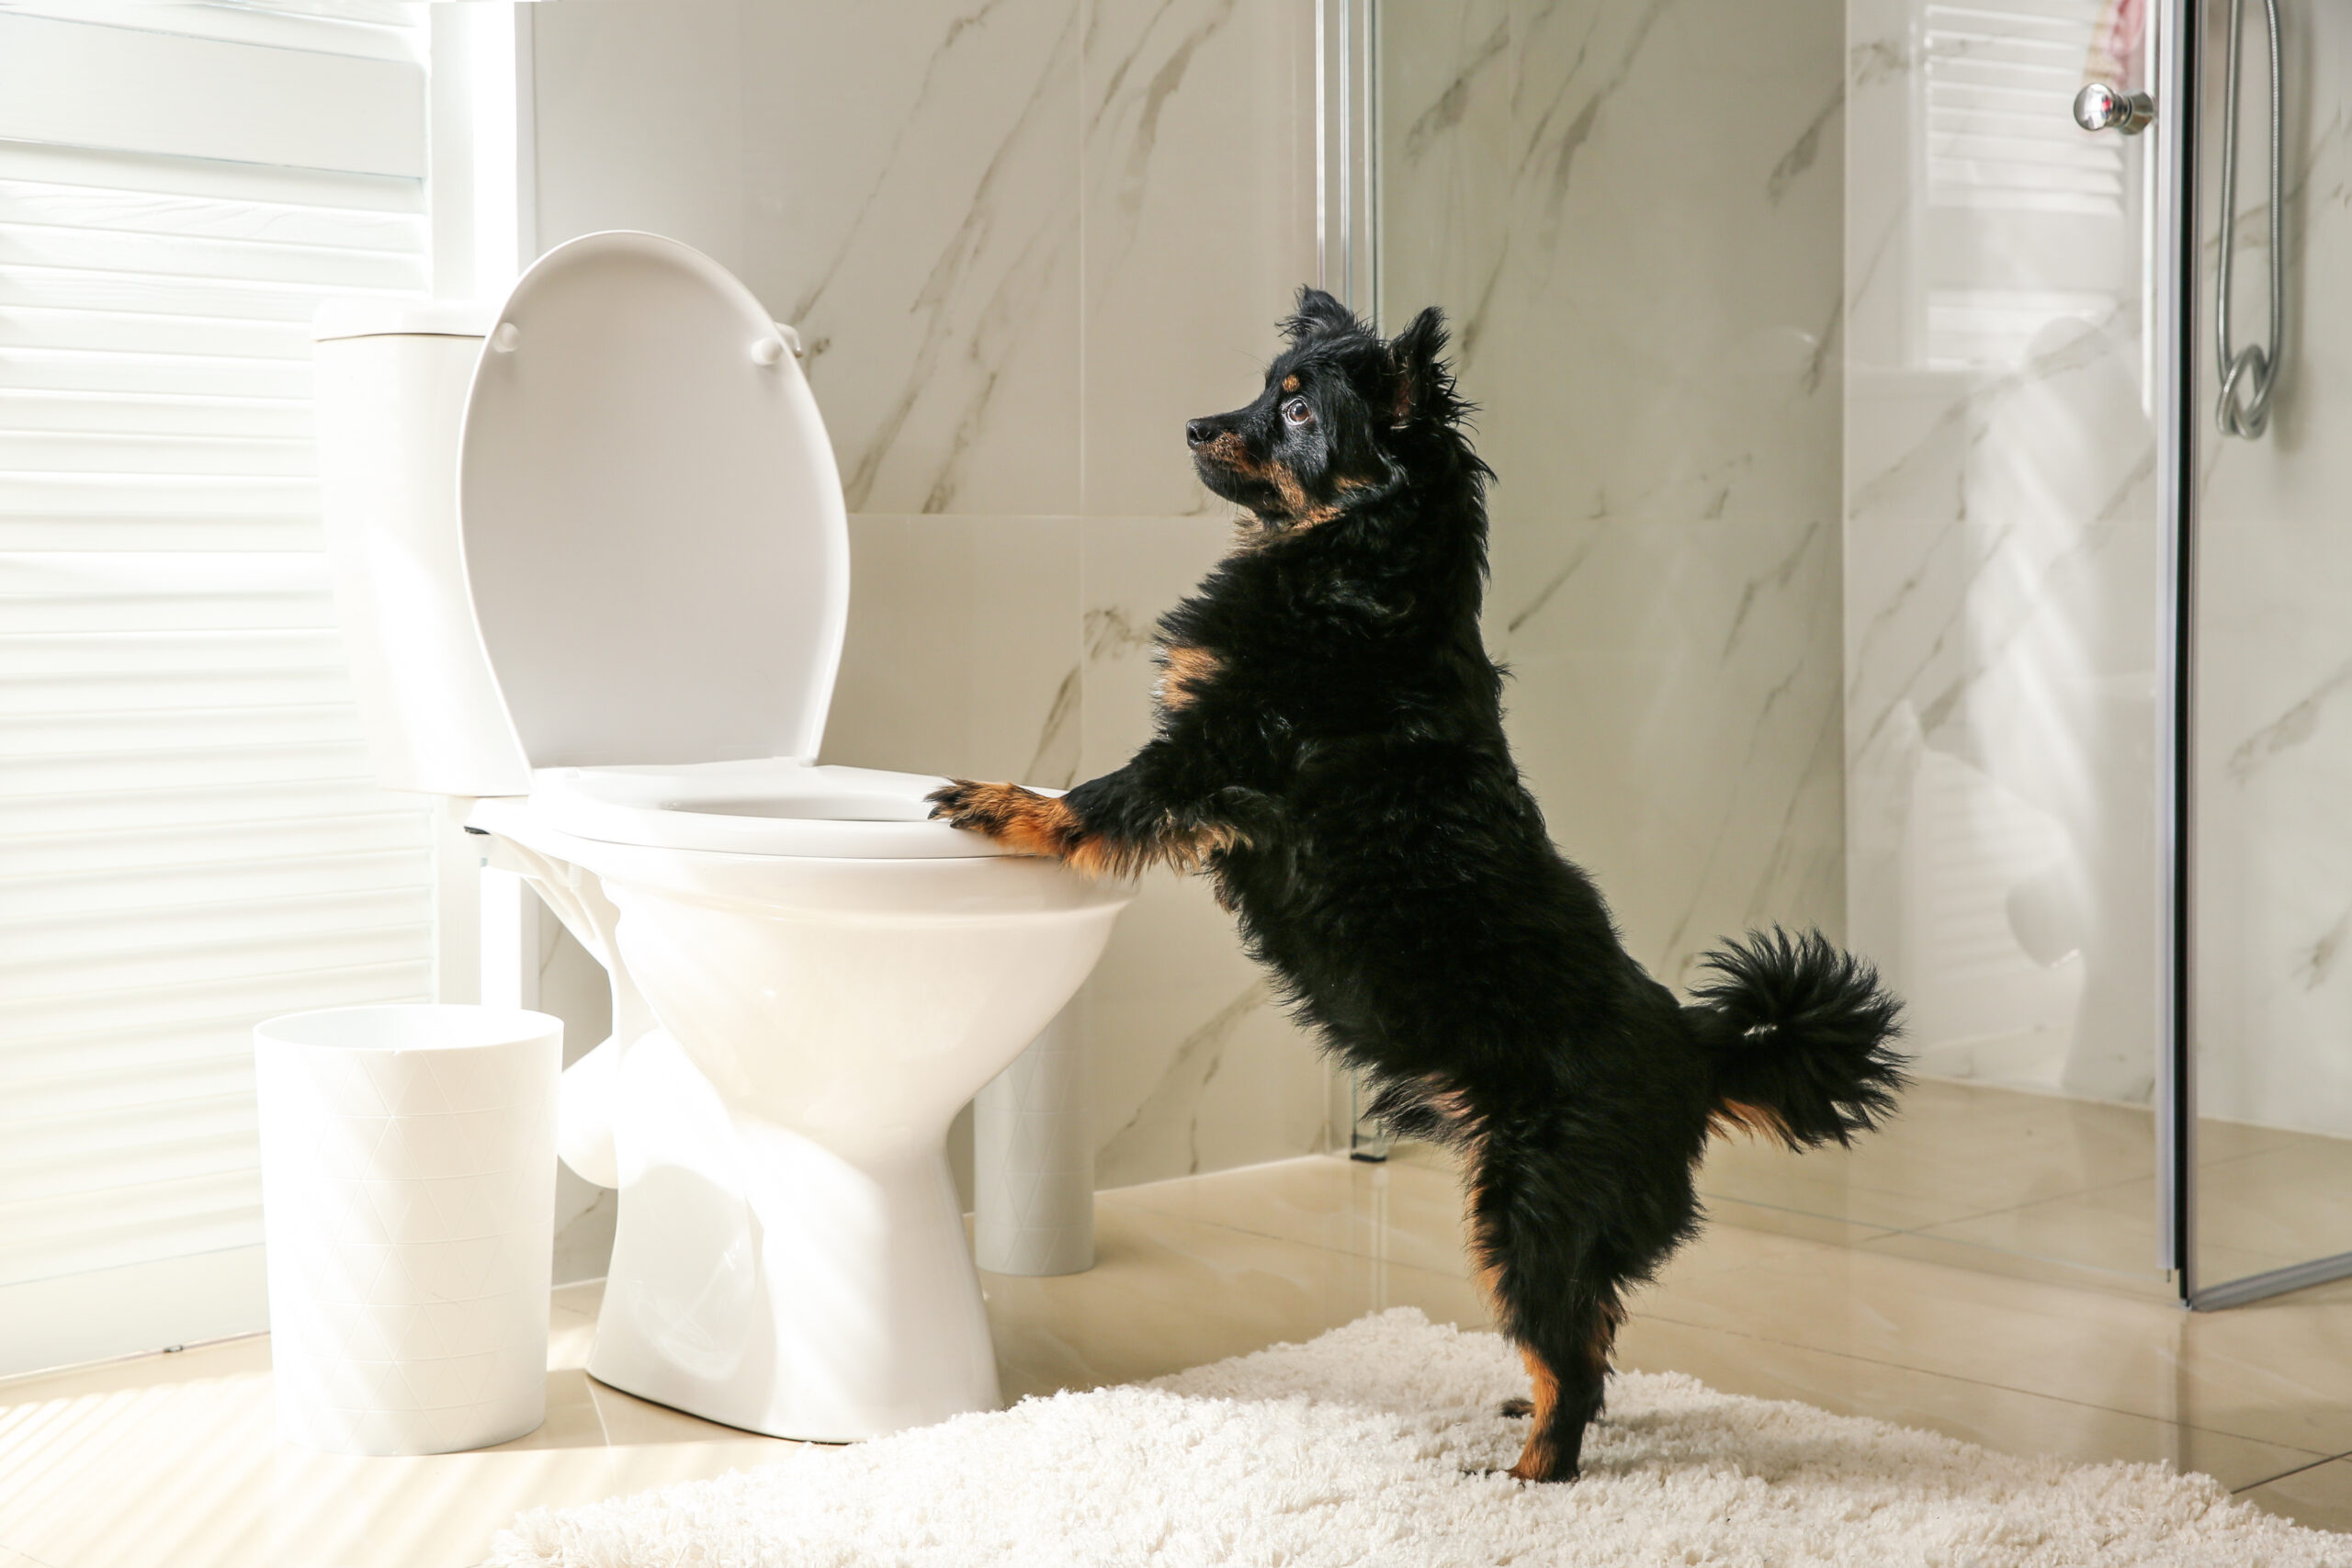 Potty training your pup with puppy and toilet